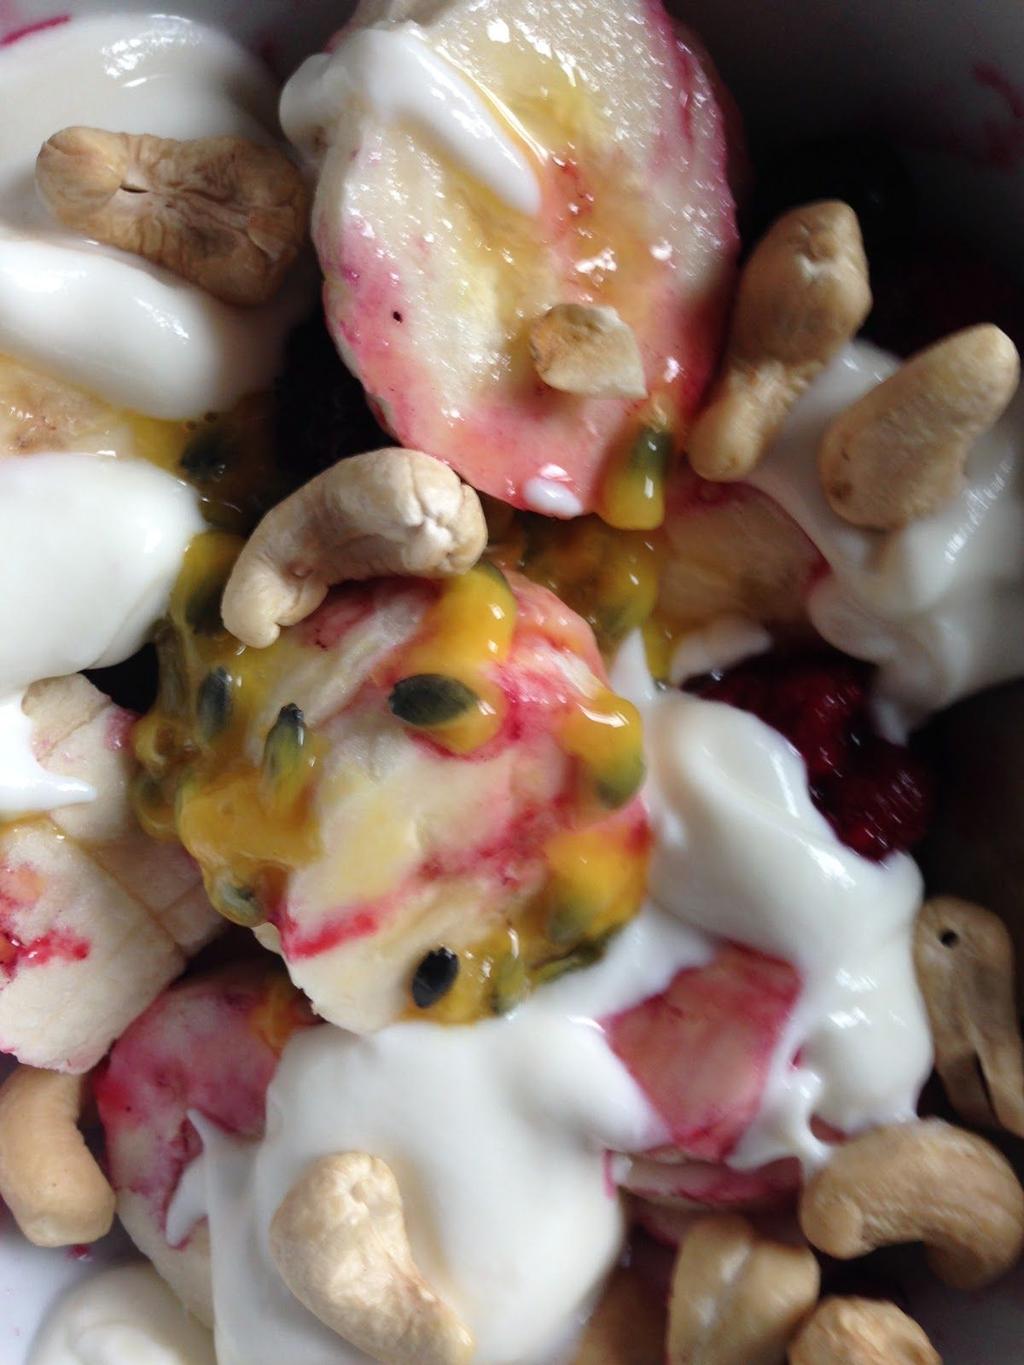 Banana Passion 2 bananas, sliced 1 cup berries ½ cup full fat greek yoghurt 1 passionfruit ¼ cup raw cashews 1. Mix together bananas, berries in a bowl. 2. Pour yoghurt over top. 3.